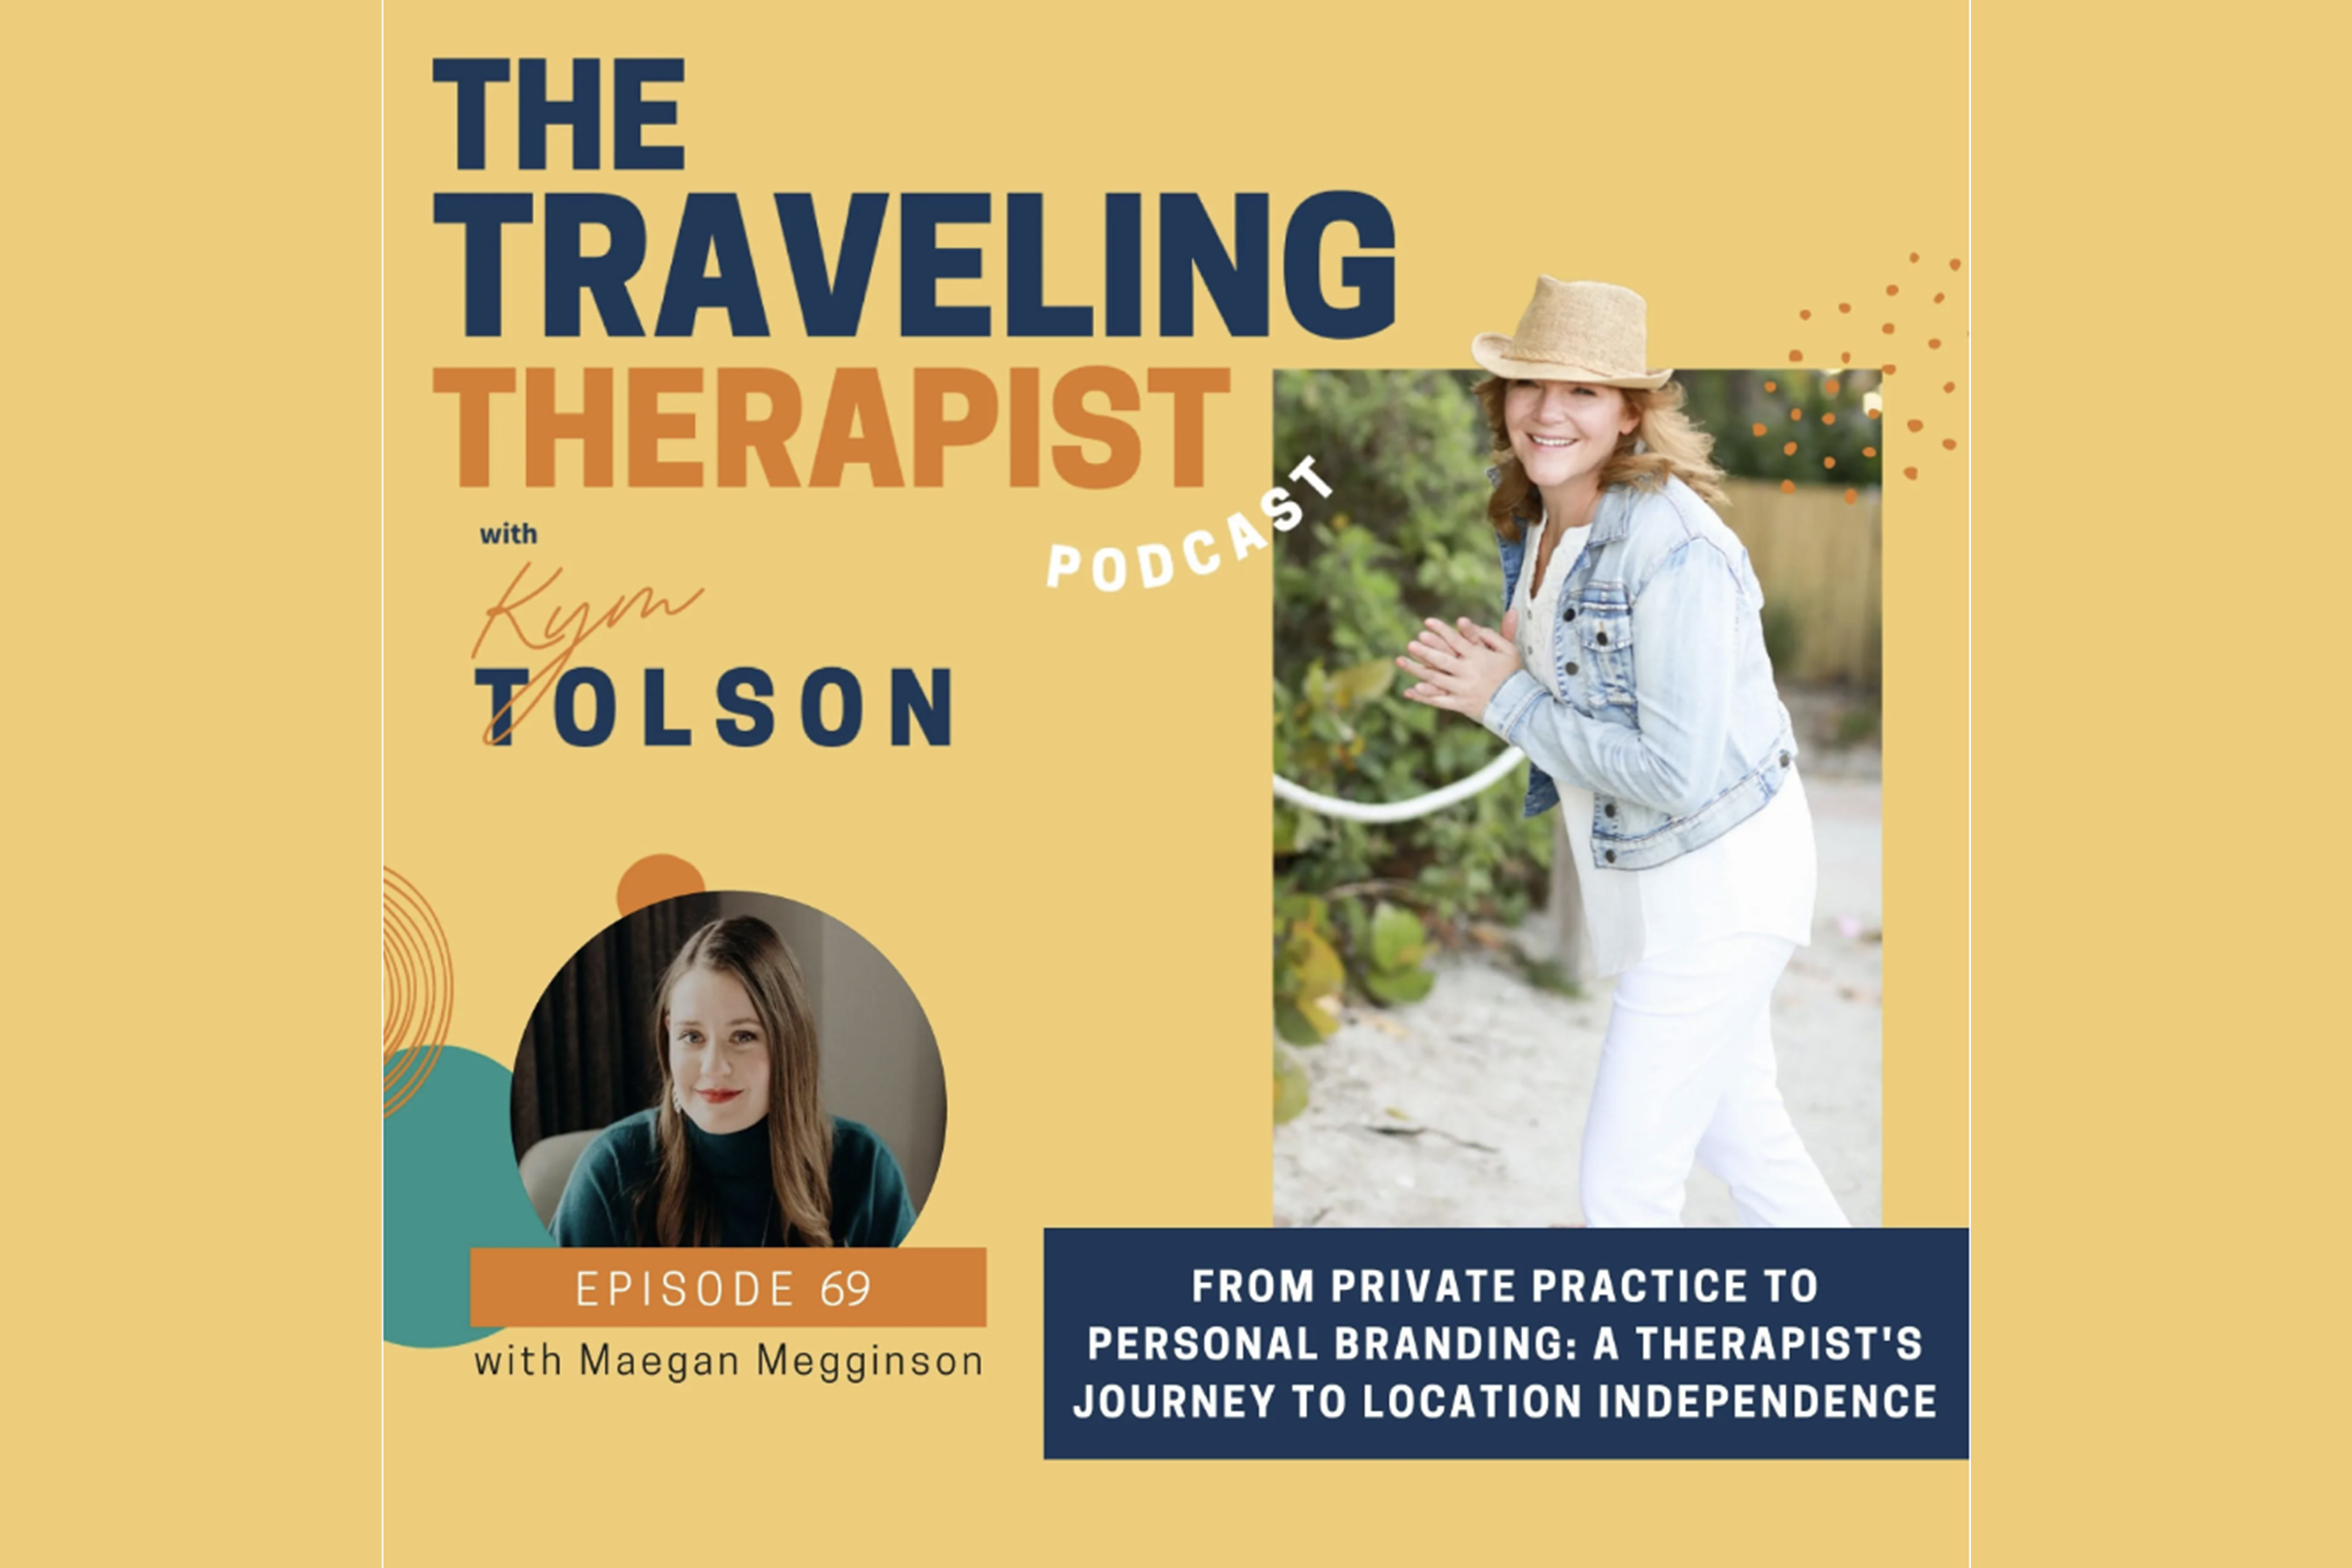 Image is a graphic for The Traveling Therapist podcast with Kim Tolson and features a photo of Kim, A white woman with brown hair, wearing all white clothing and a straw hat, a headshot of Maegan, a white woman with long brown hair and red lipstick, and the words "From private practice to personal branding: a therapist's journey to location independance. Episode 69 with Maegan Megginson."